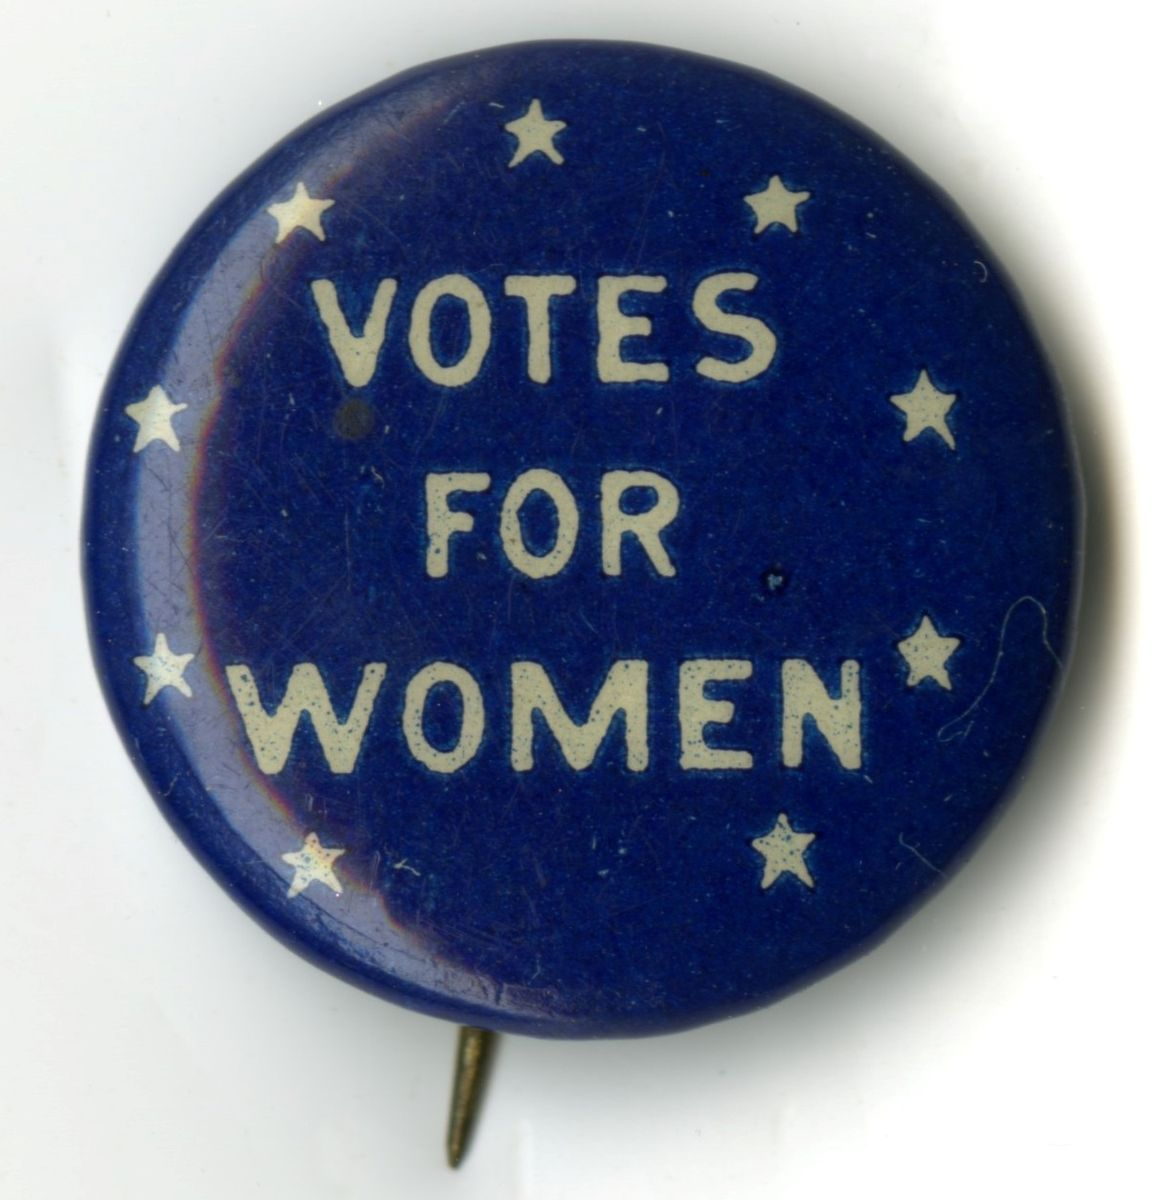 Suffragettes and suffragists: